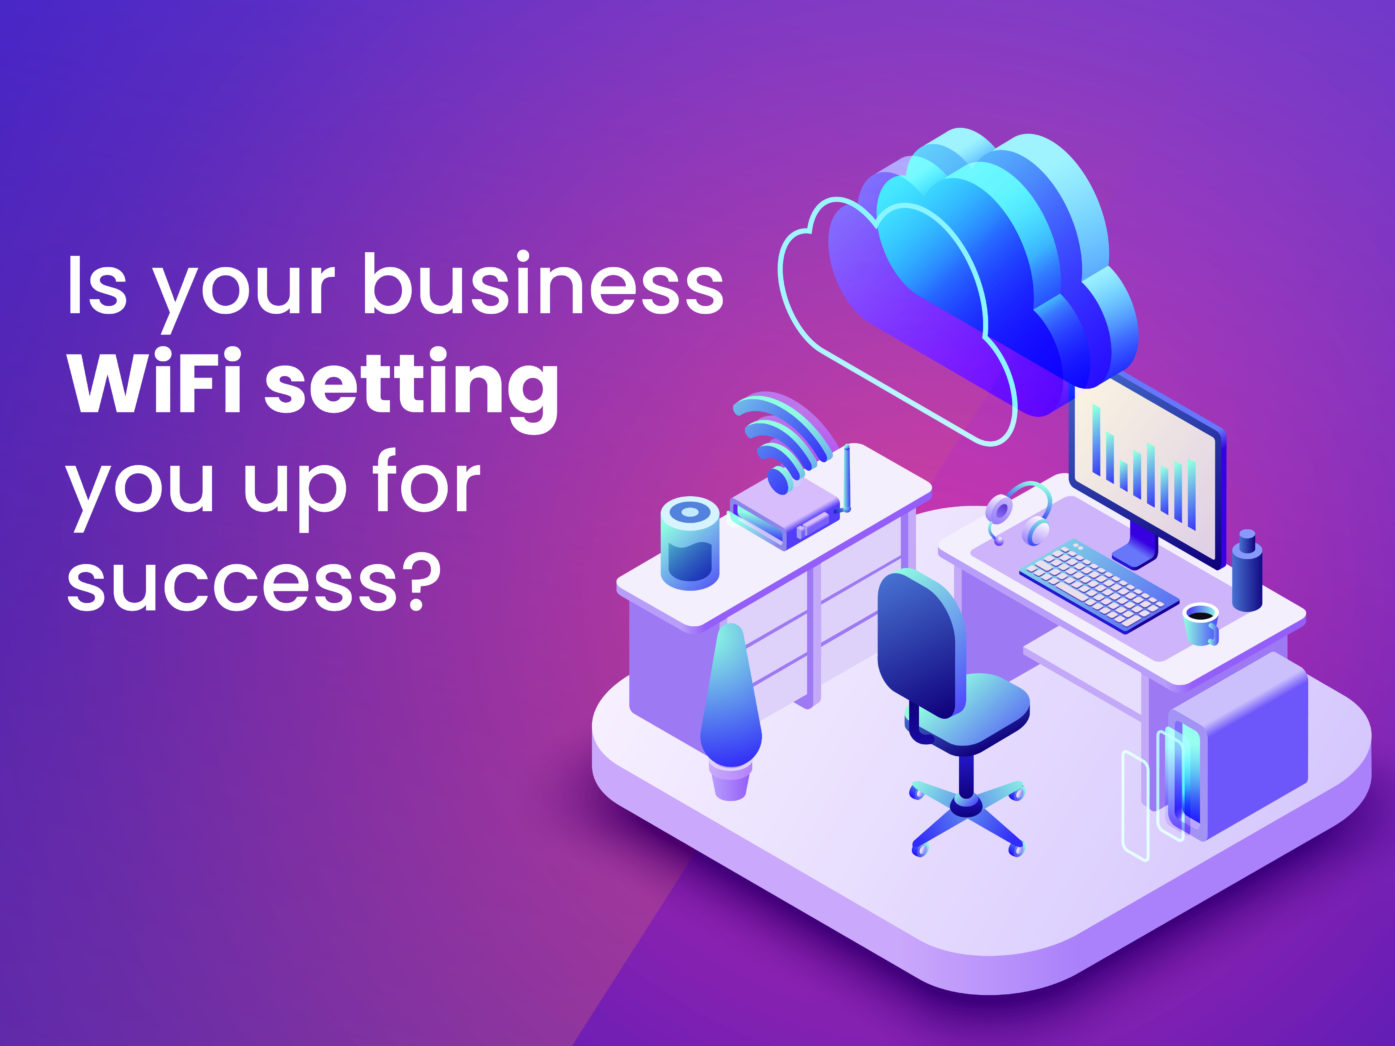 Is your business WiFi setting you up for success?